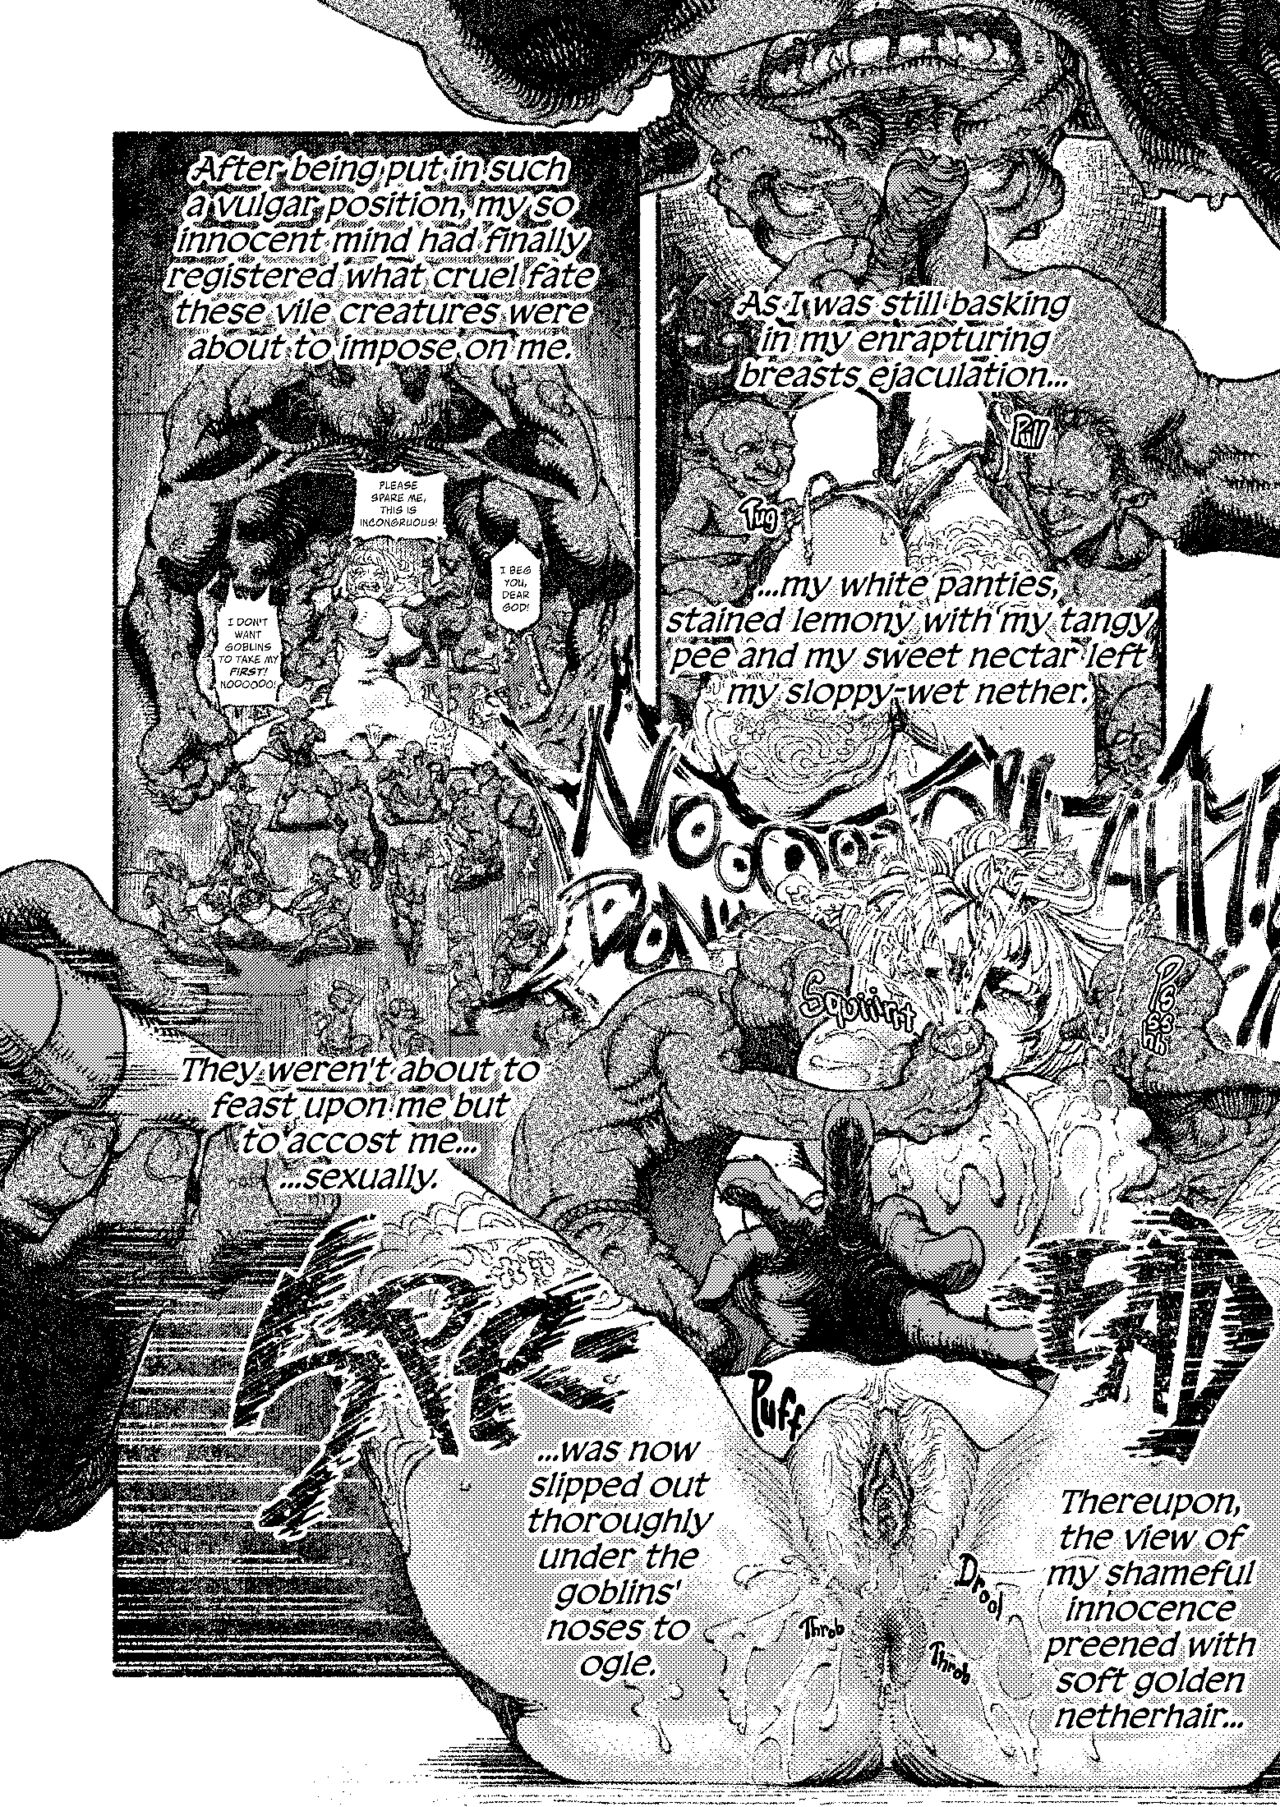 [Edrix3] The Record of Greened Pearls ~The Bestial Gangbang of a Buxomly Senxual Acolyte Girl~ (Goblin Slayer) 7